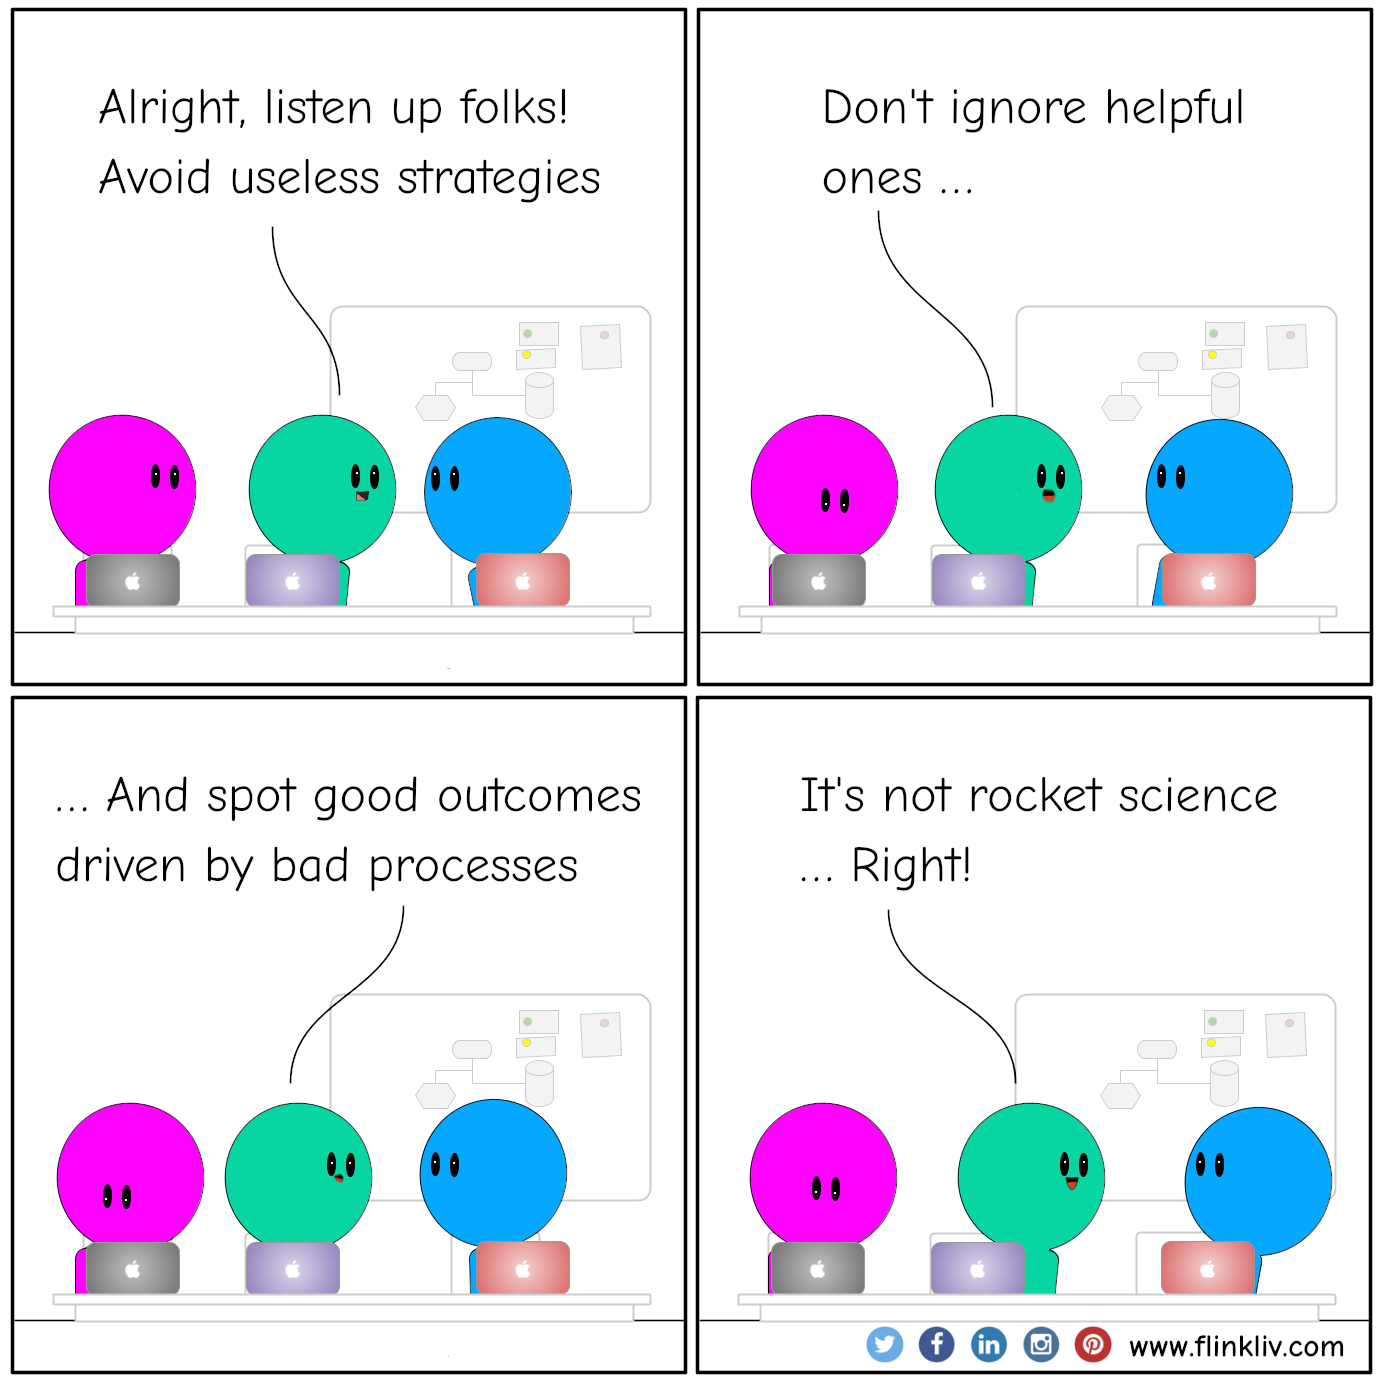 Conversation between A and B about how the importance to avoid useless strategies
				A: Alright, listen up folks! 
				A: Avoid useless strategies
				A: Don't ignore helpful ones, 
				A: and spot good outcomes driven by bad processes. 
				A: It's not rocket science, right?

				